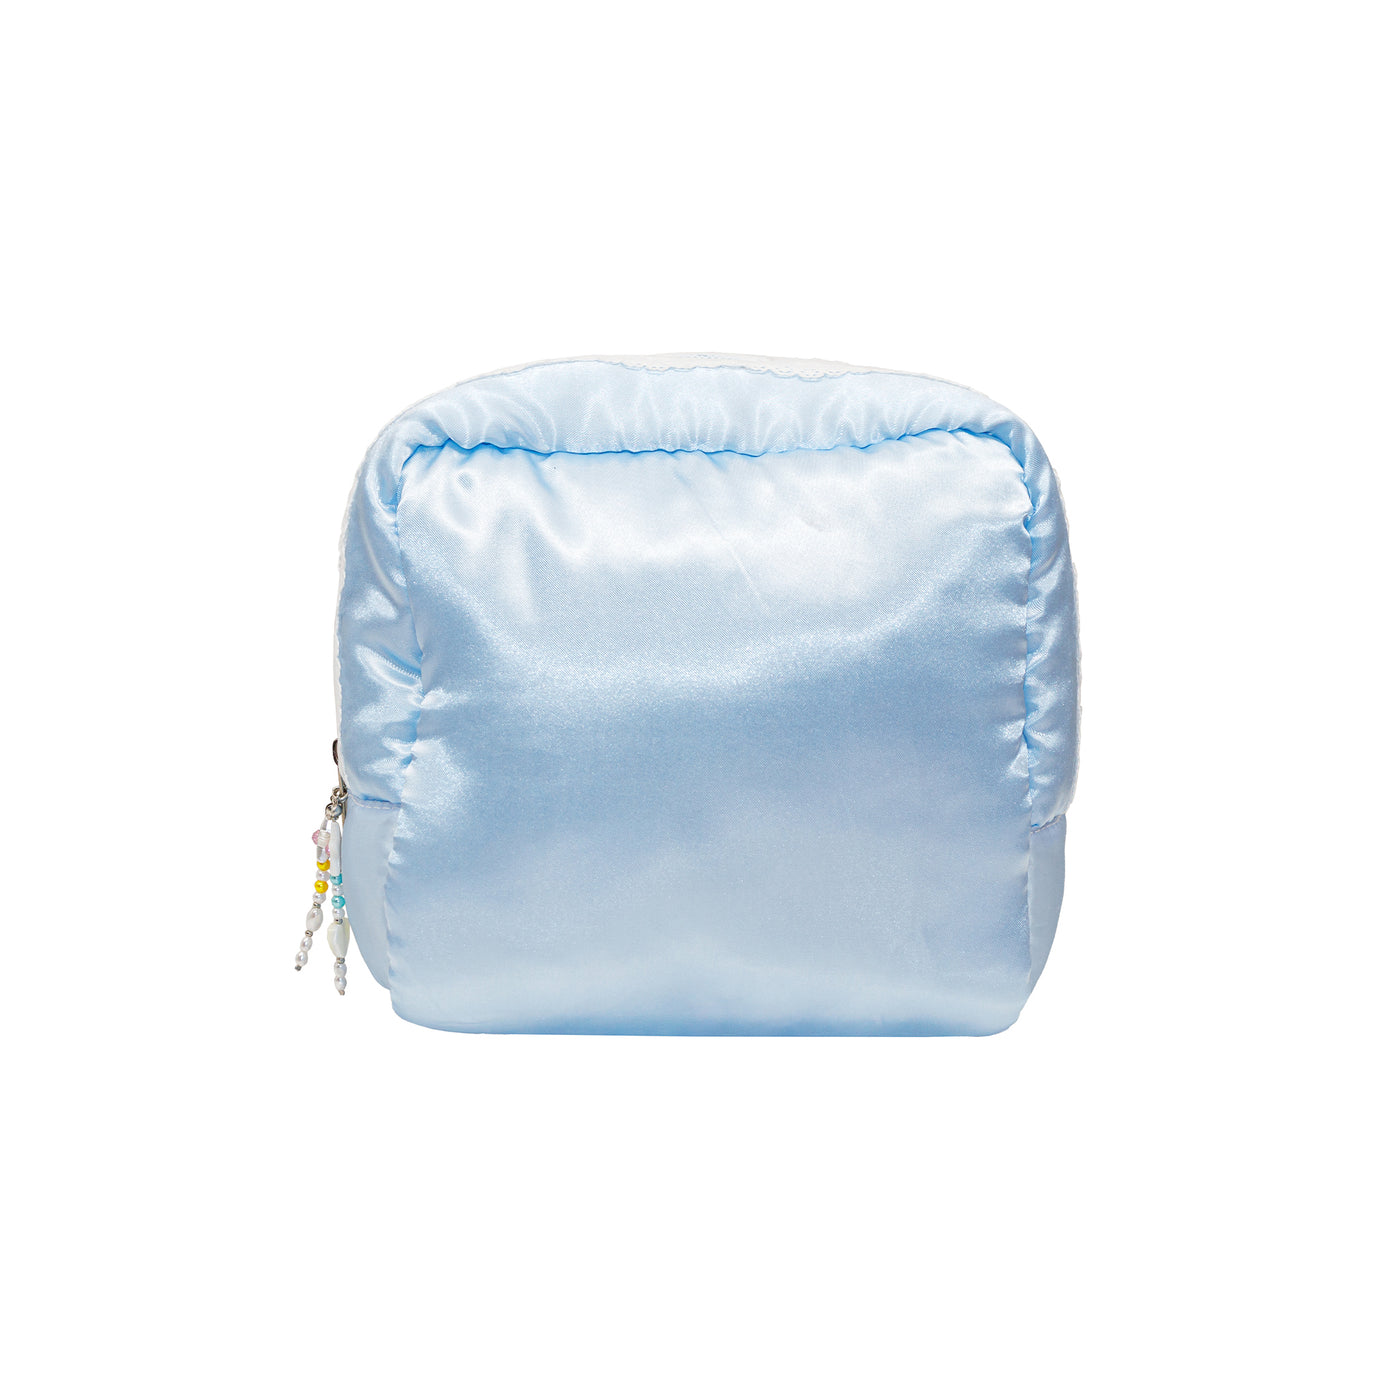 Water Fairy Pouch in Baby Aqua